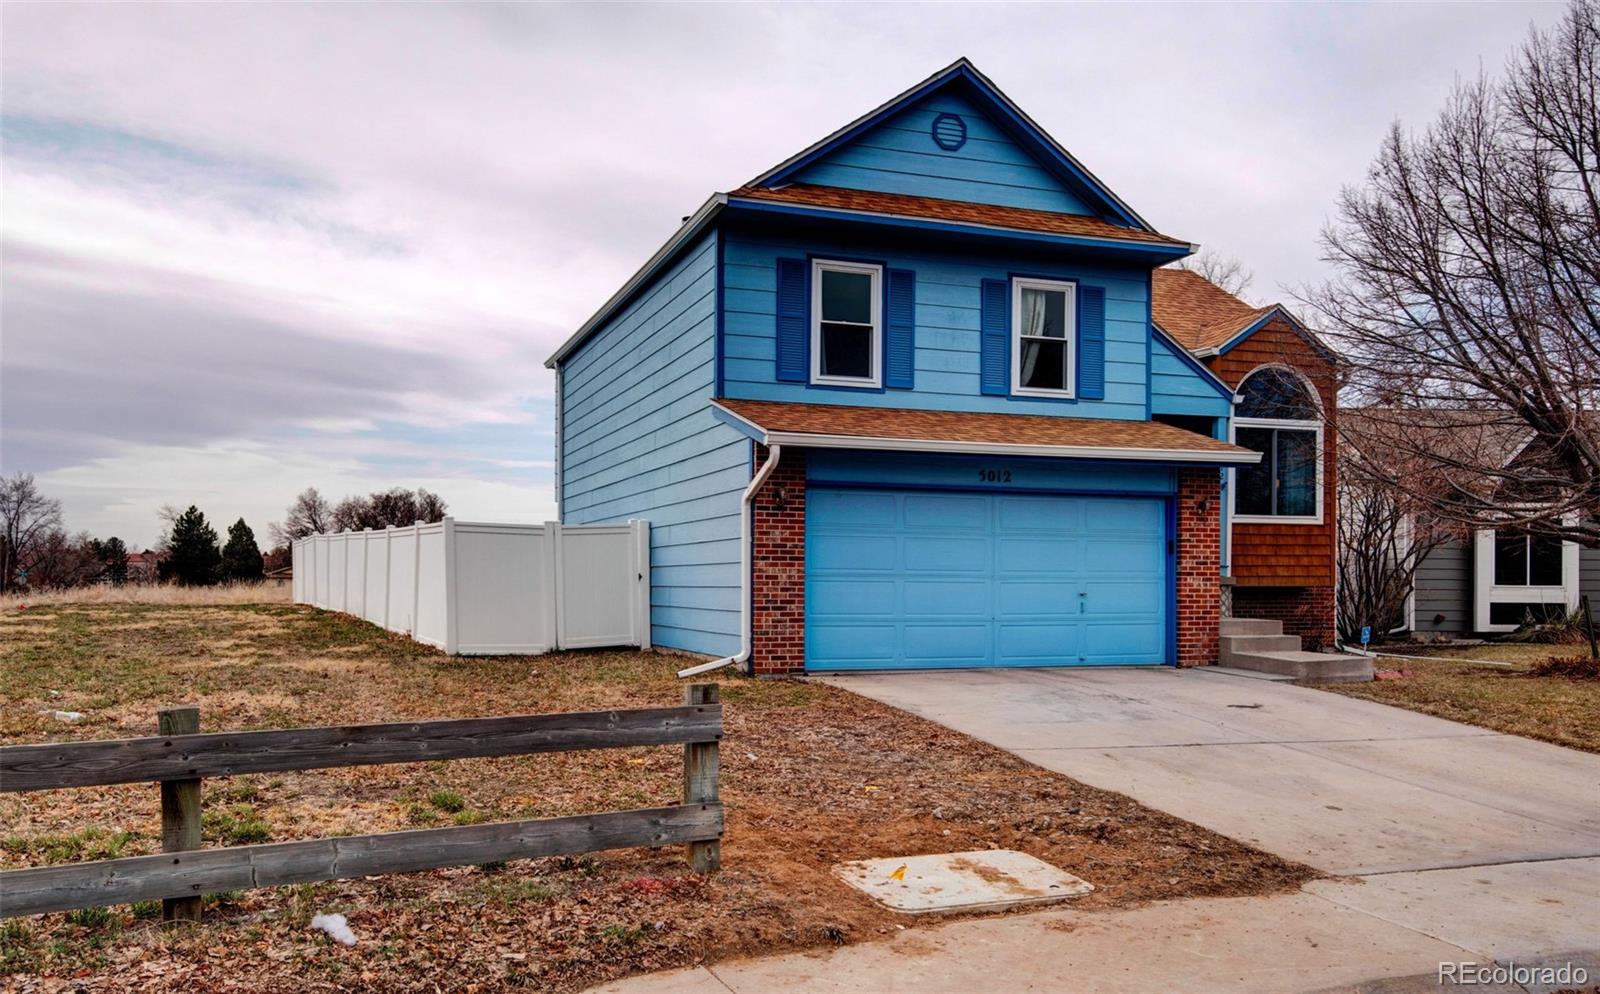 Report Image for 5012 W 77th Drive,Westminster, Colorado